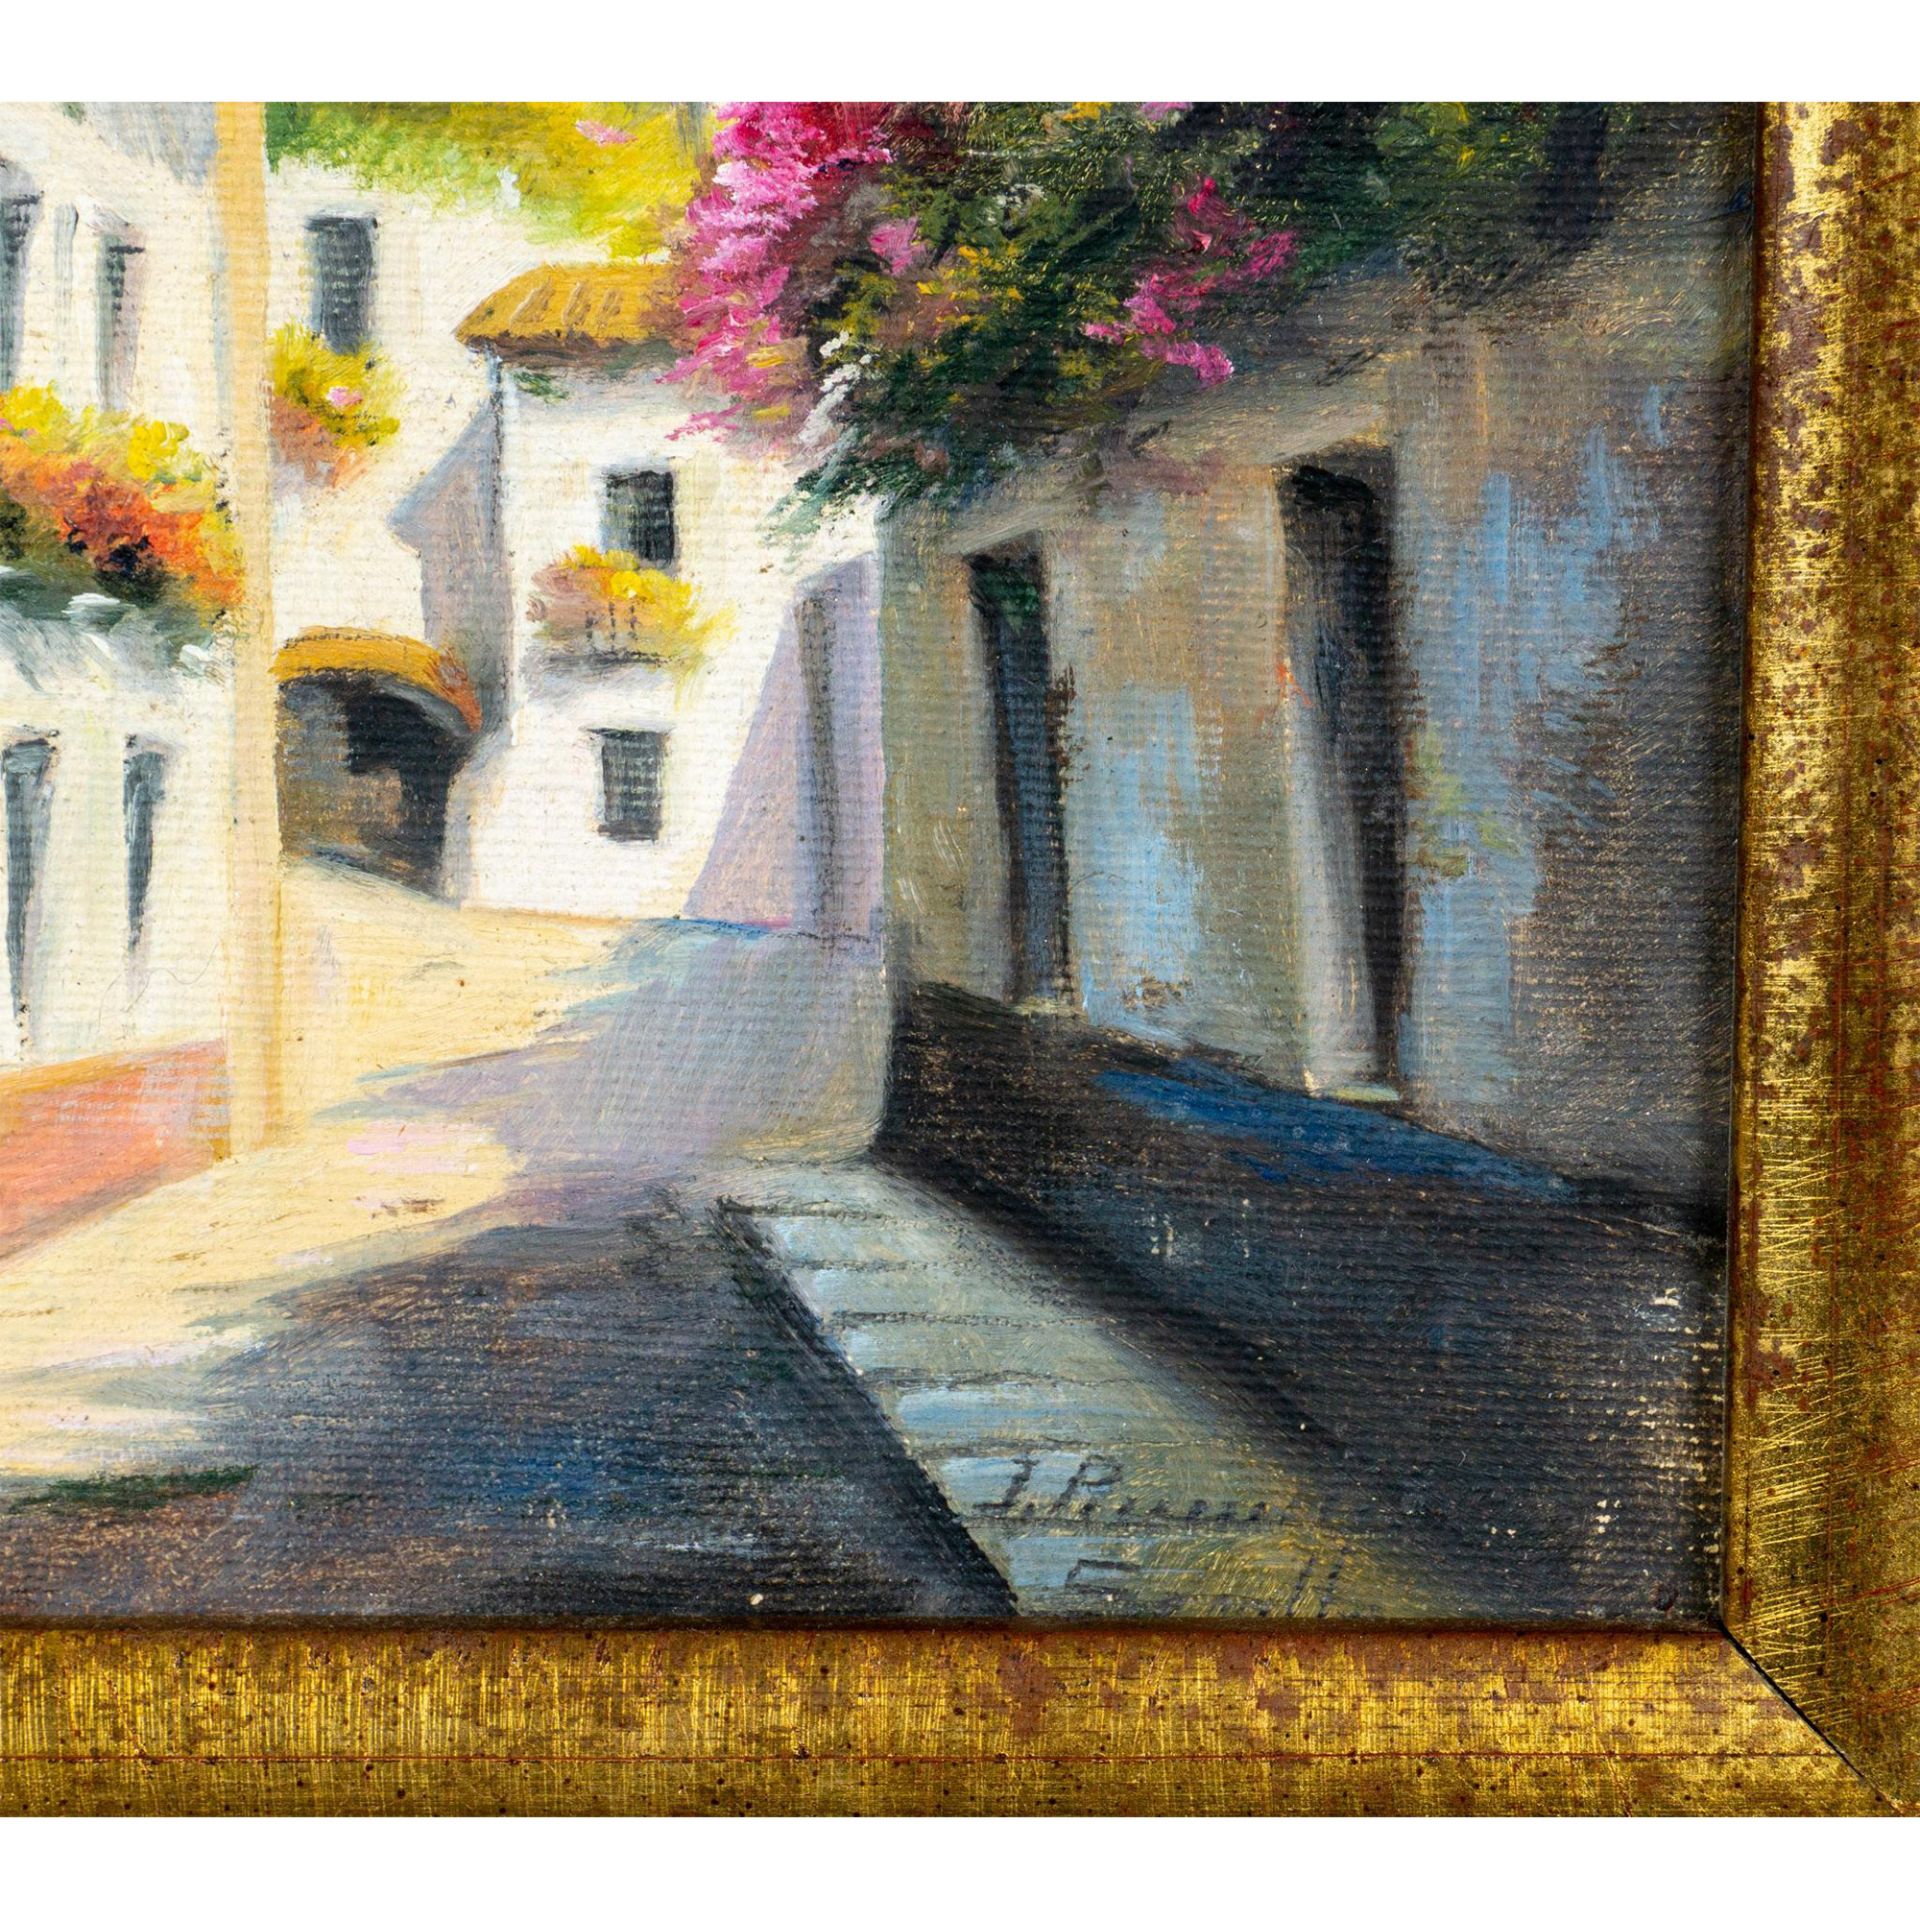 Artist Signed Acrylic Painting on Canvas, Callejon - Image 3 of 6